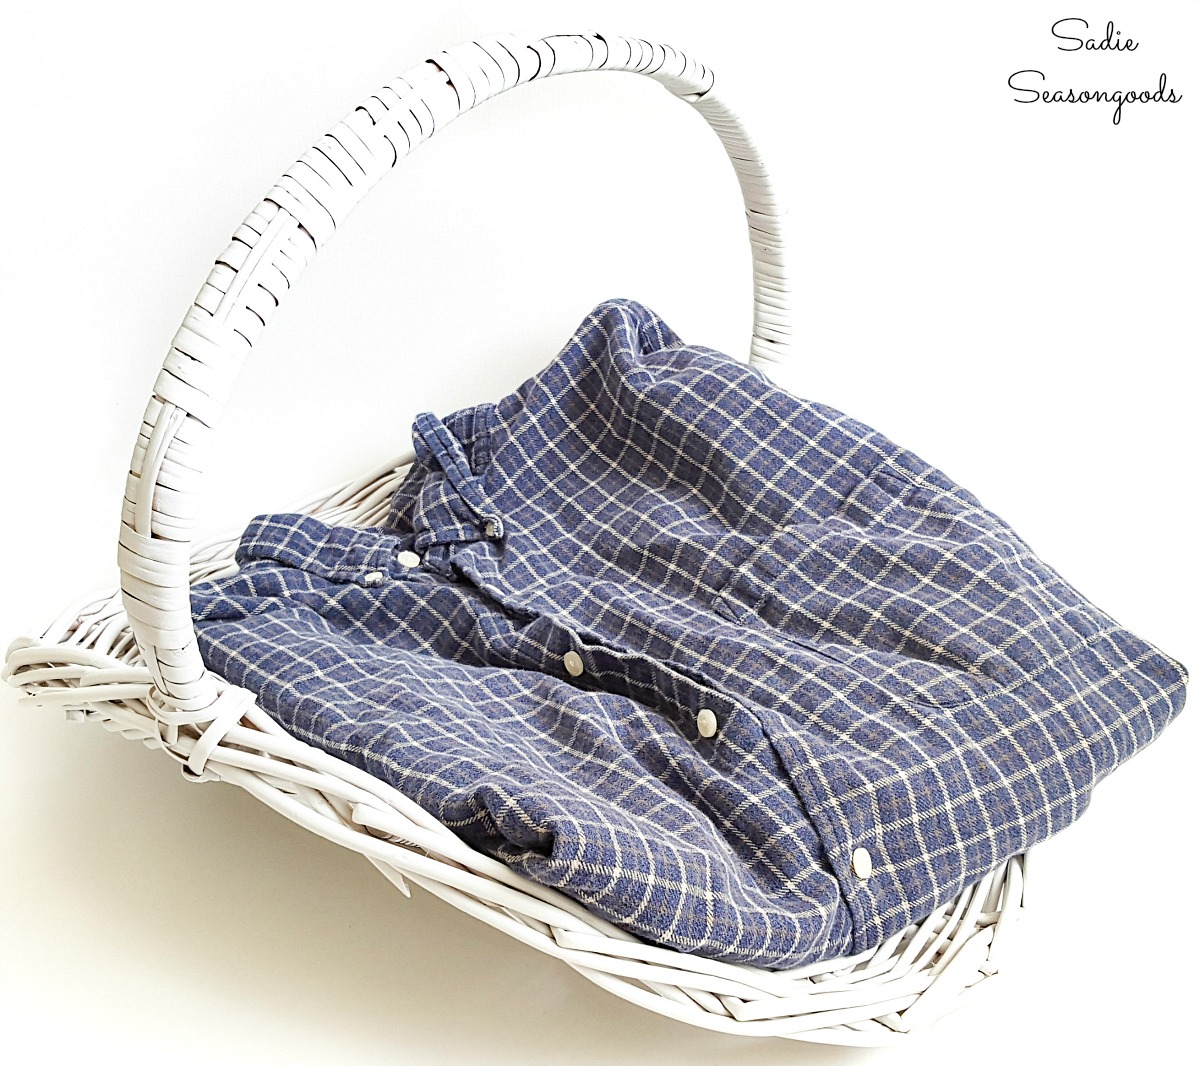 Using a flannel shirt to upcycle a fireplace basket